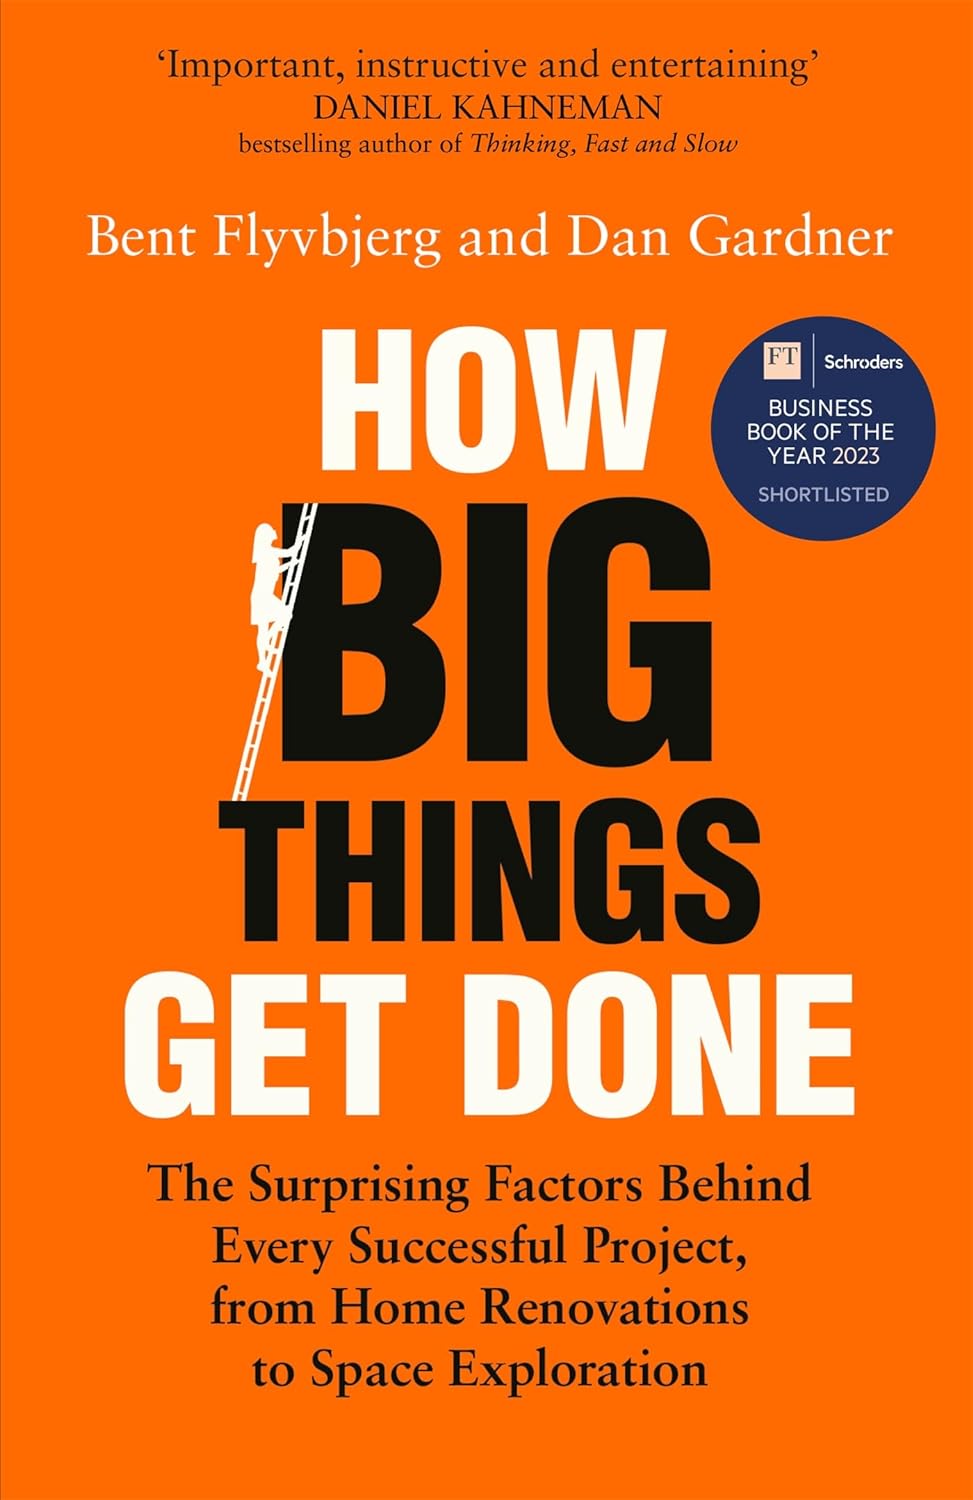 HOW BIG THINGS GET DONE - THE SURPRISING FACTORS BEHIND EVERY SUCCESSFUL PROJECT, FROM HOME